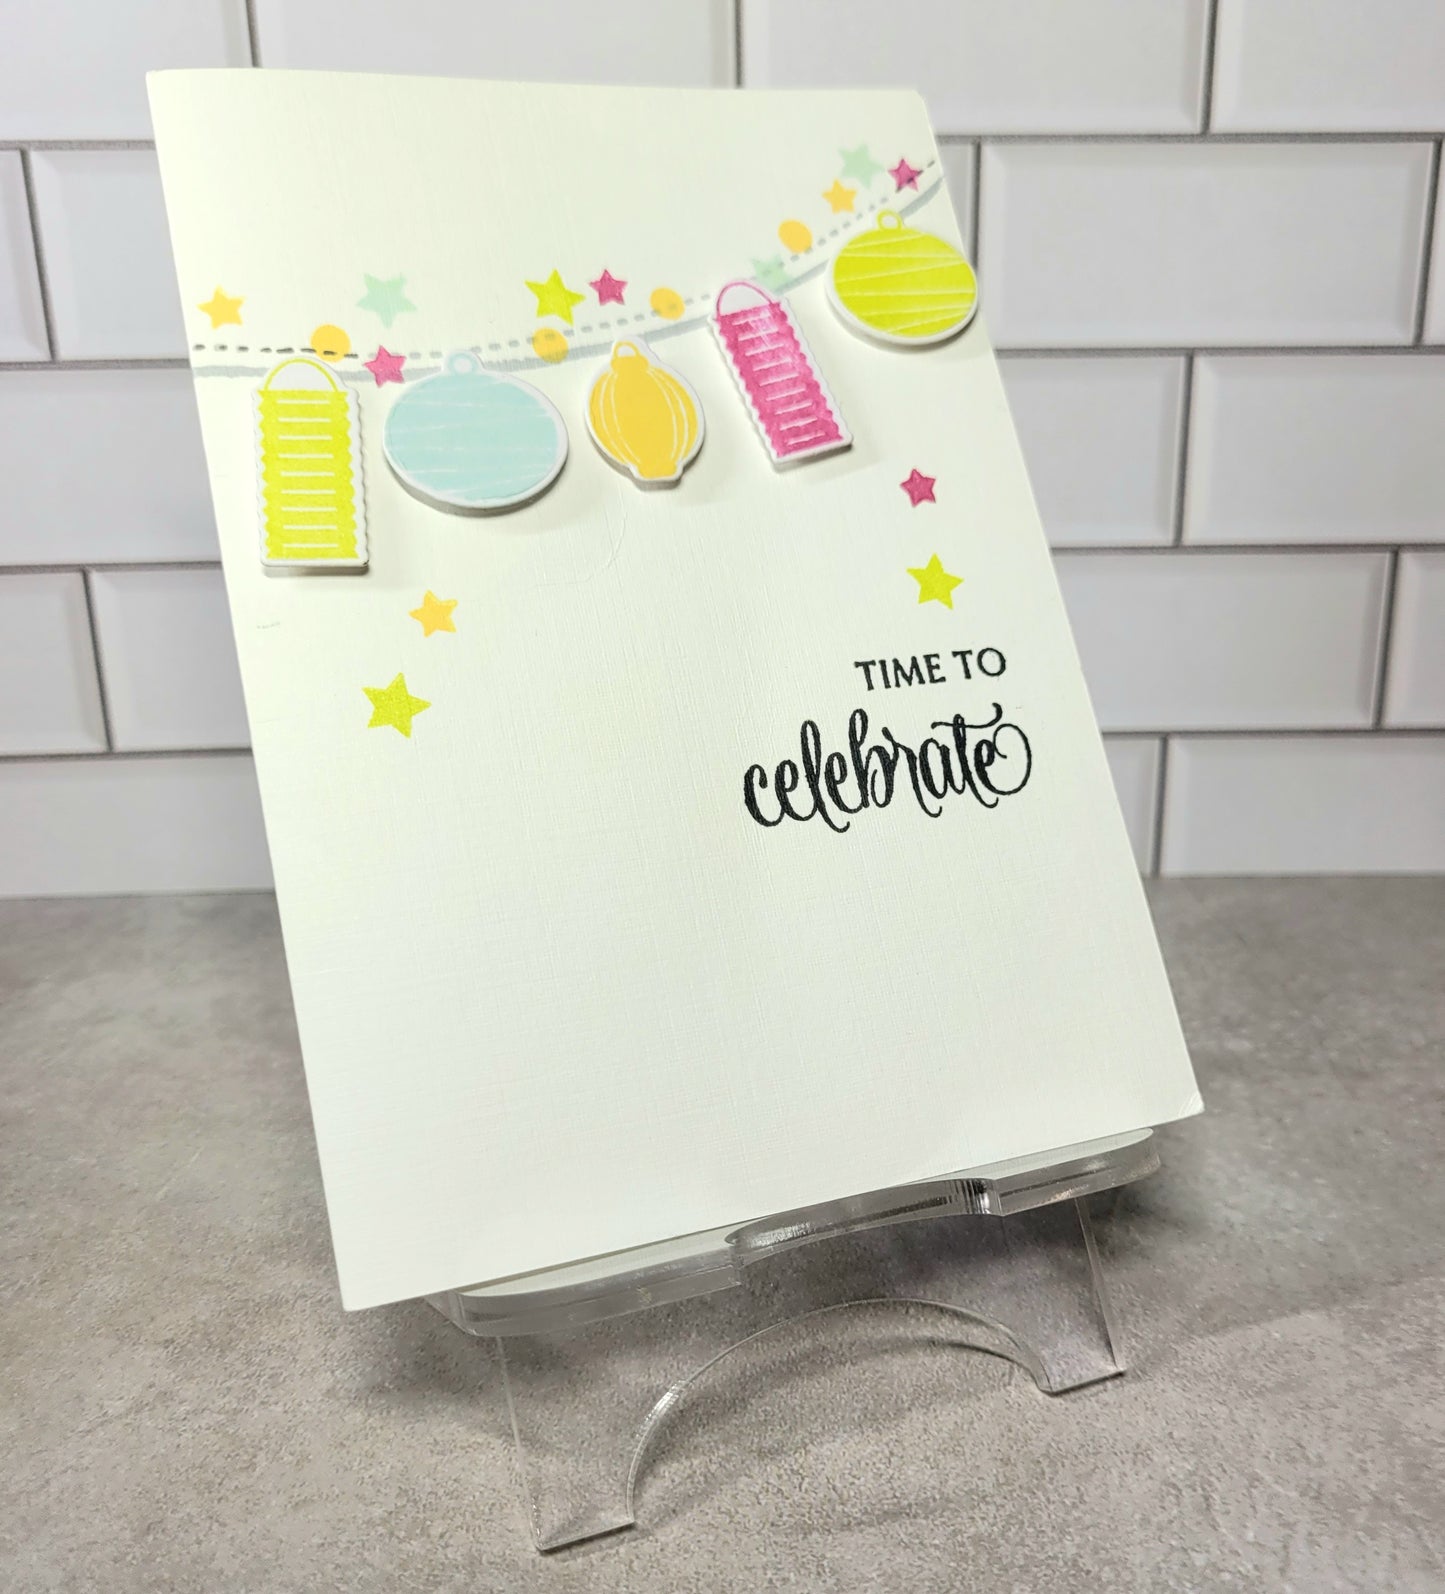 Limited Edition - Acrylic Stands for Phones, Small Planners and Craft Projects